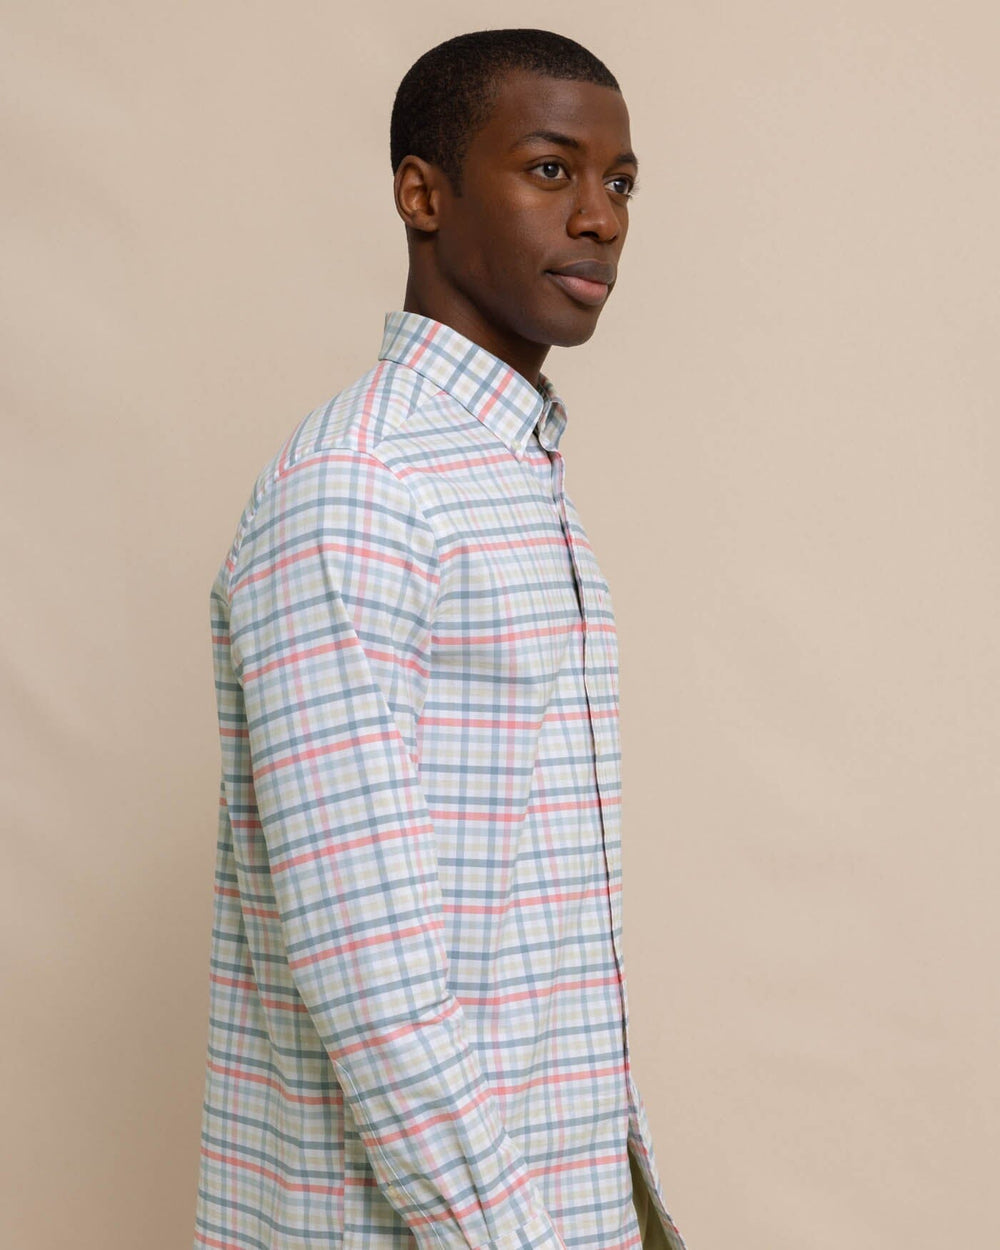 The front view of the Southern Tide Coastal Passage Pelham Gingham Long Sleeve Sport Shirt by Southern Tide - Geranium Pink